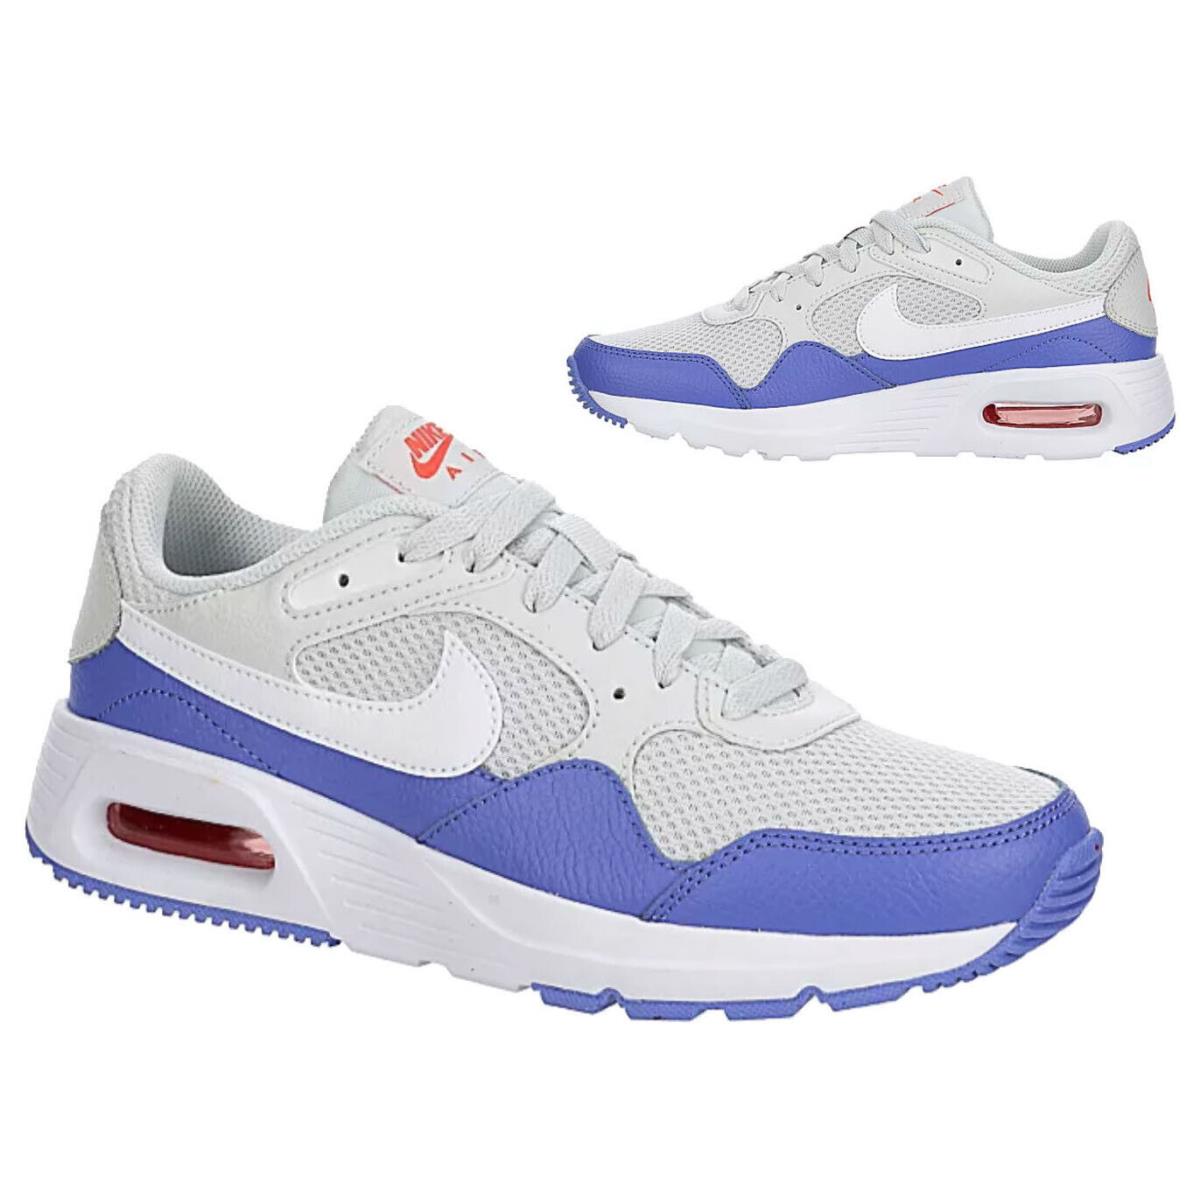 Nike Air Max SC Casual Running Shoes Women`s Sneakers Gray Purple All Sizes